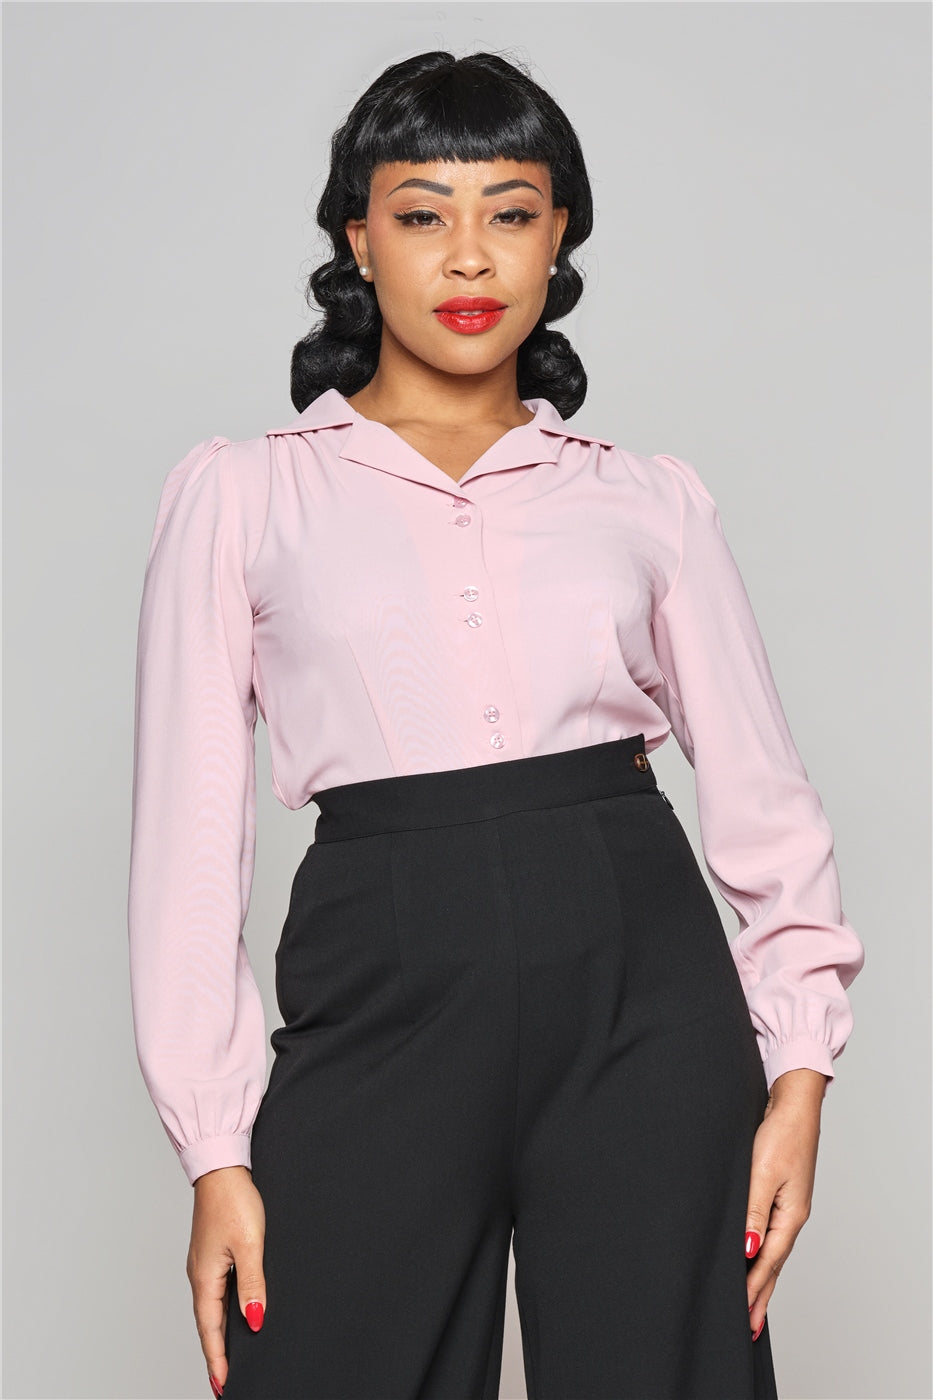 Pretty lady with a vintage shoulder length hair style  standing with her hands by her sides smiling softly,  wearing a beautiful pink blouse and high waisted black trousers.